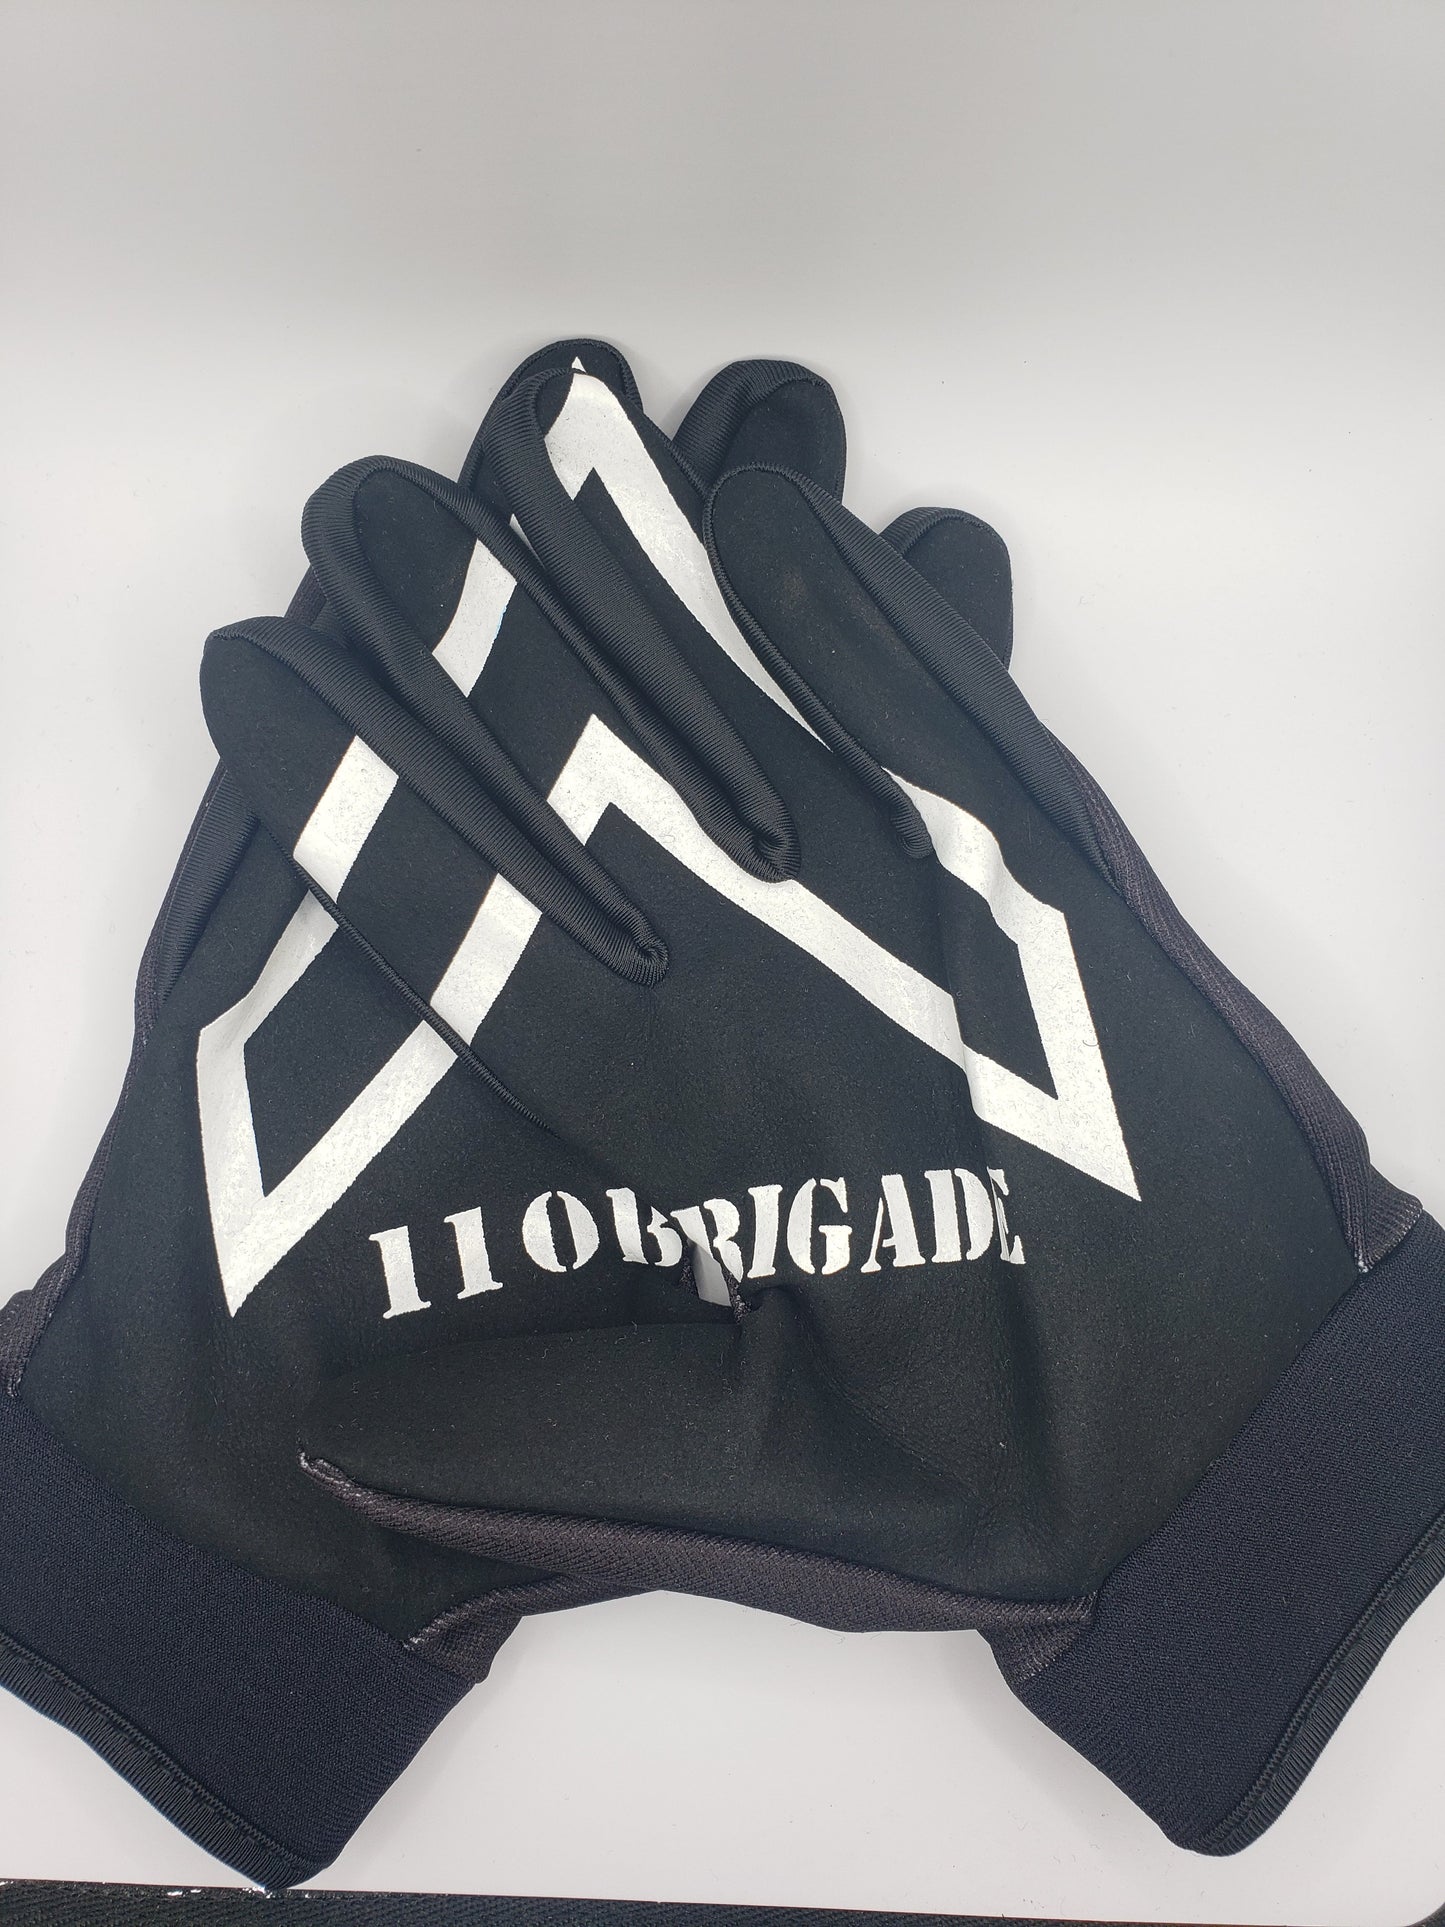 YOUTH BLACK OPS MX GLOVE